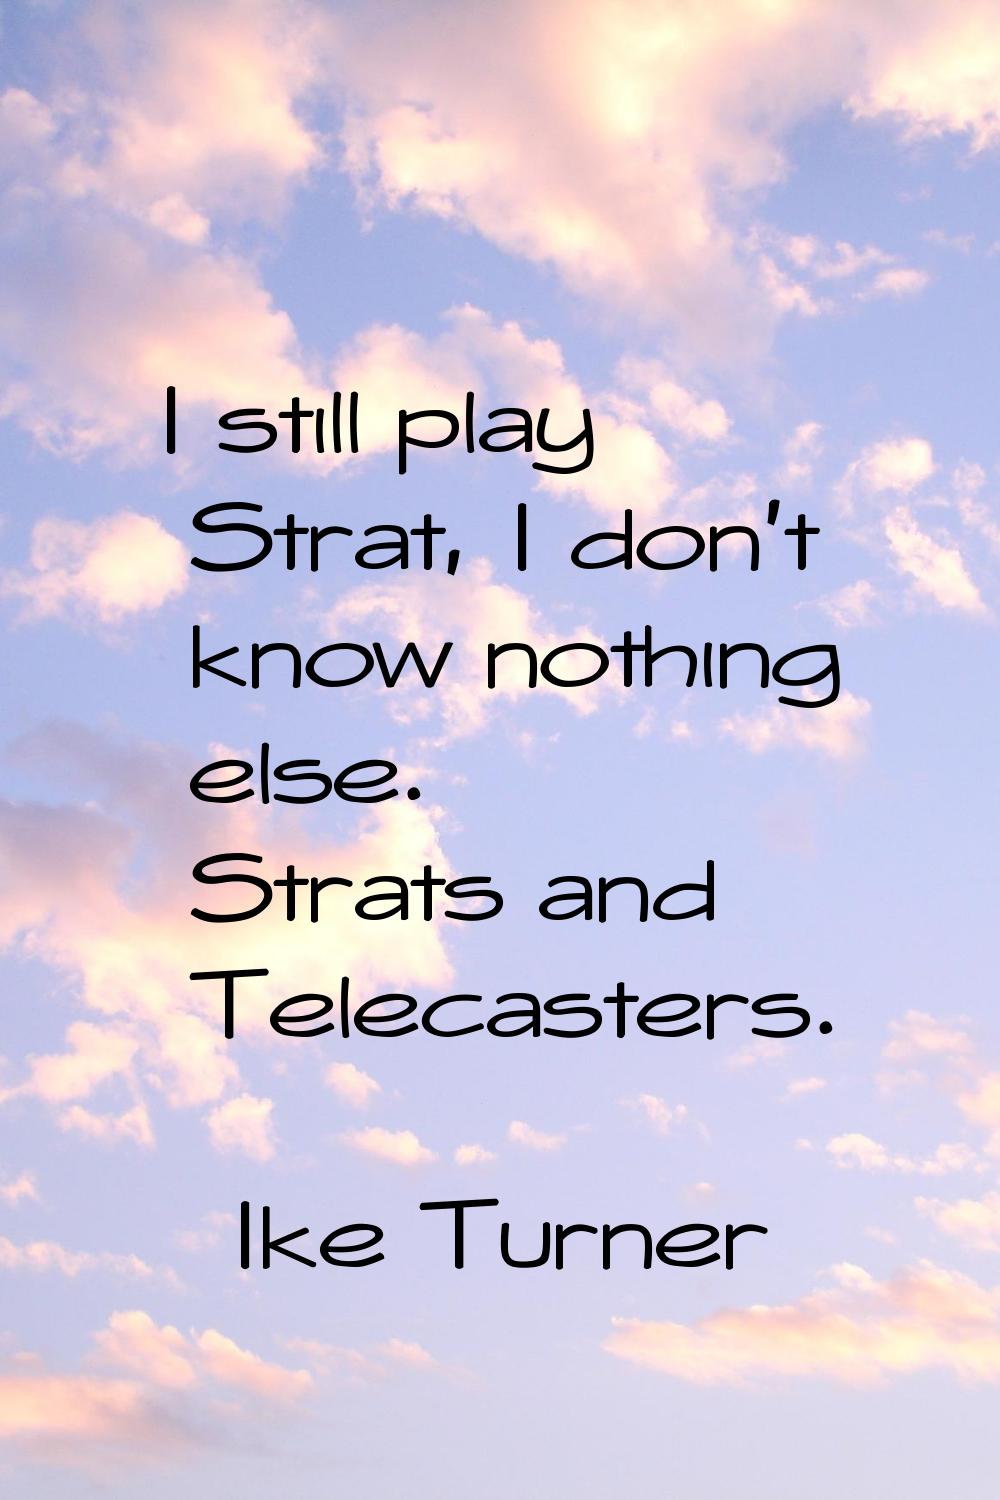 I still play Strat, I don't know nothing else. Strats and Telecasters.